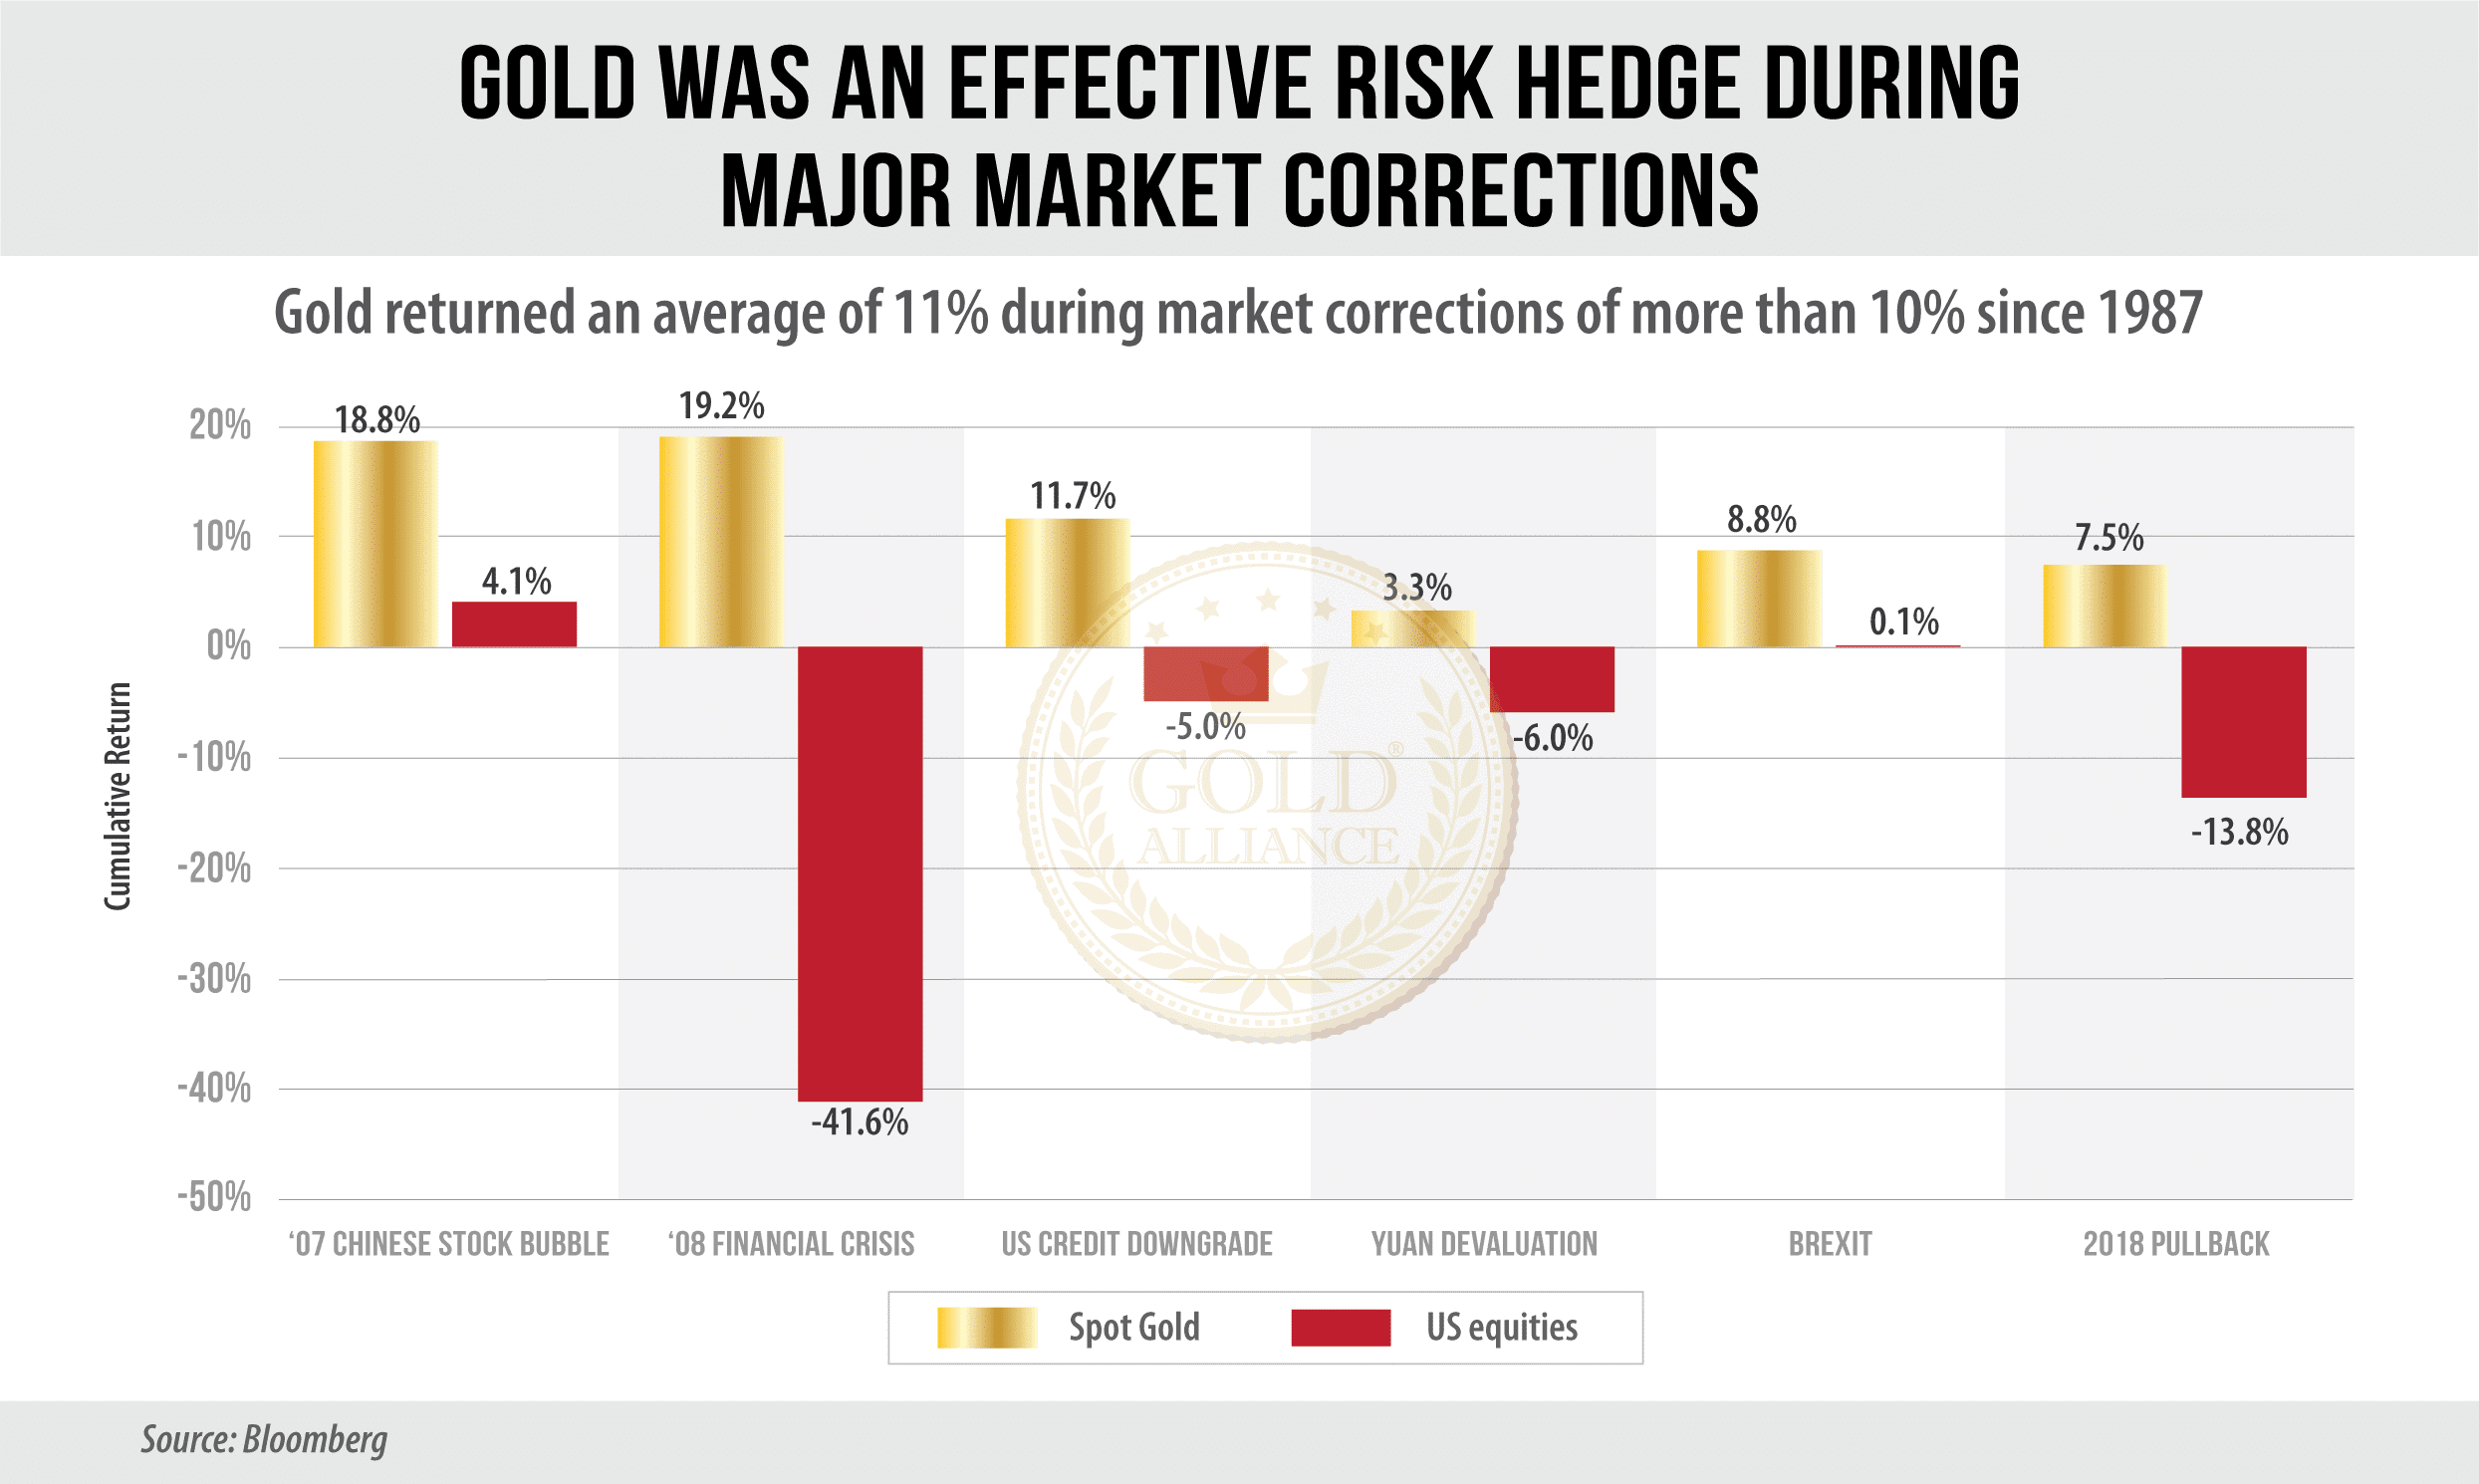 Gold tends to perform better when the market has major corrections. If the experts are right in assuming that a crash is on its way, gold might see a major spike.